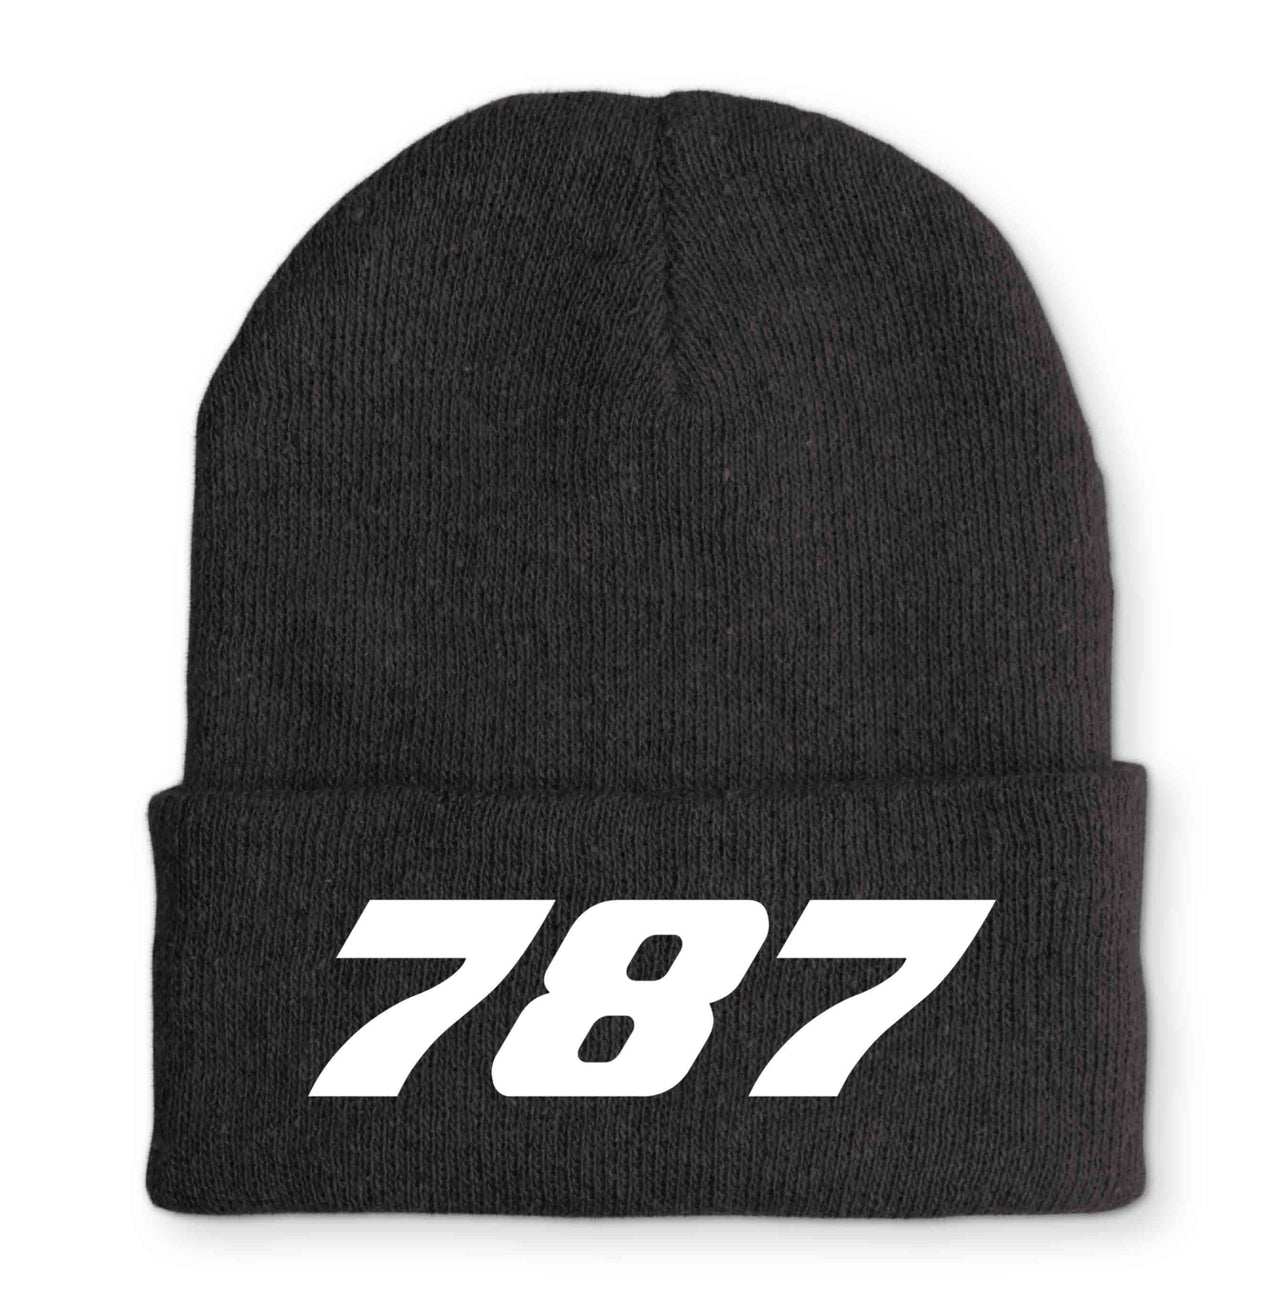 787 Flat Text Embroidered Beanies